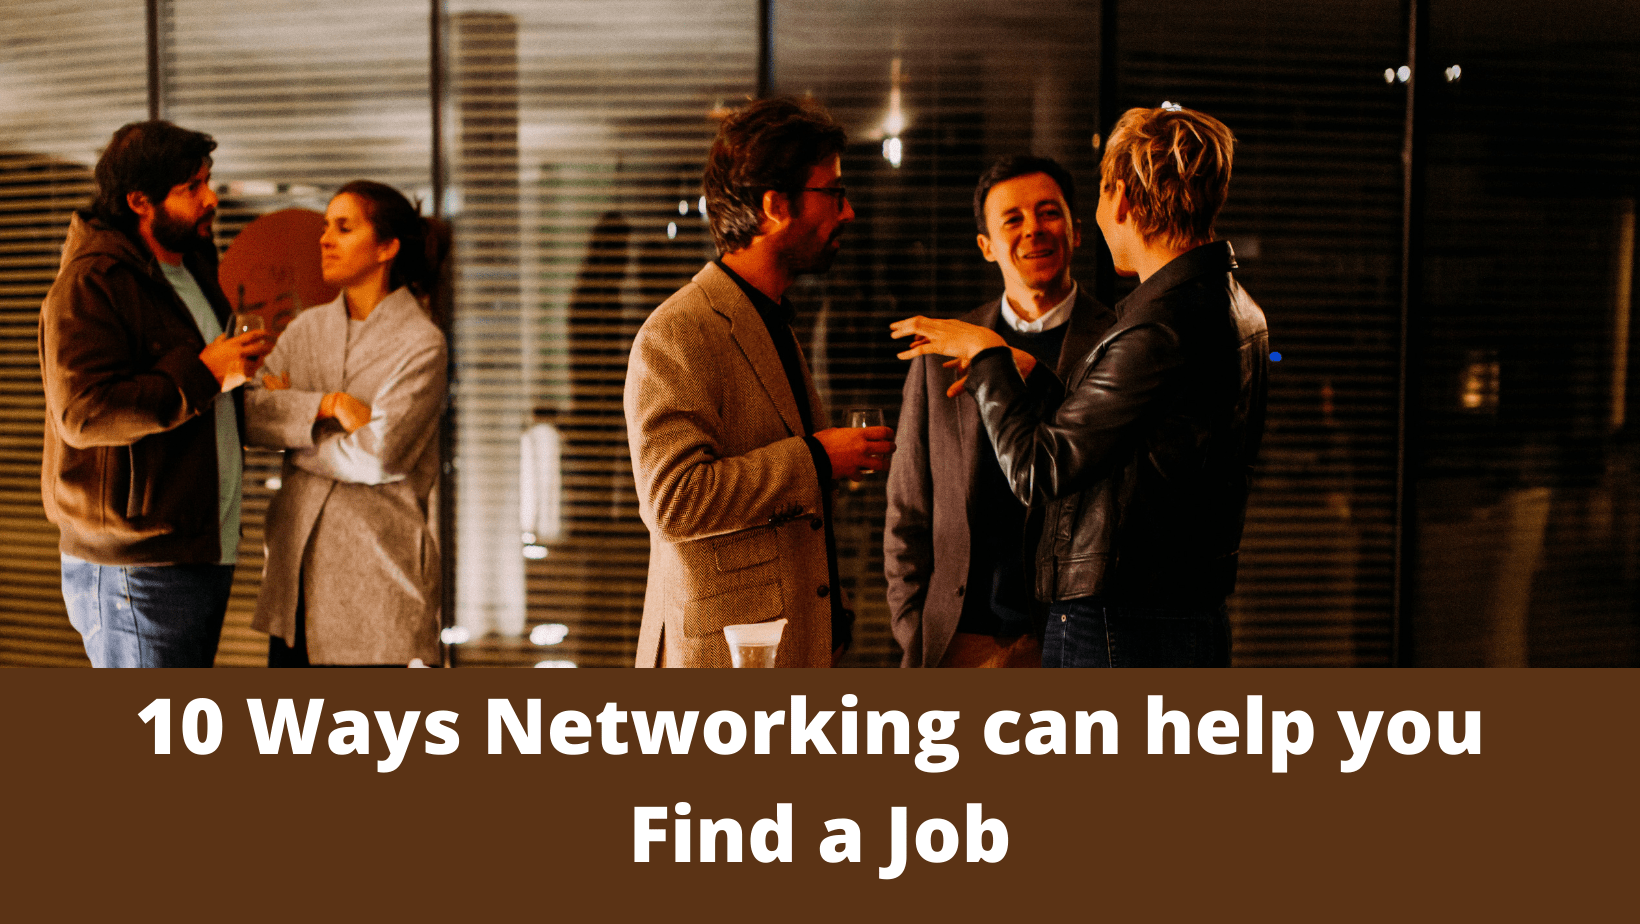 10 Ways Networking can help you Find a Job 1